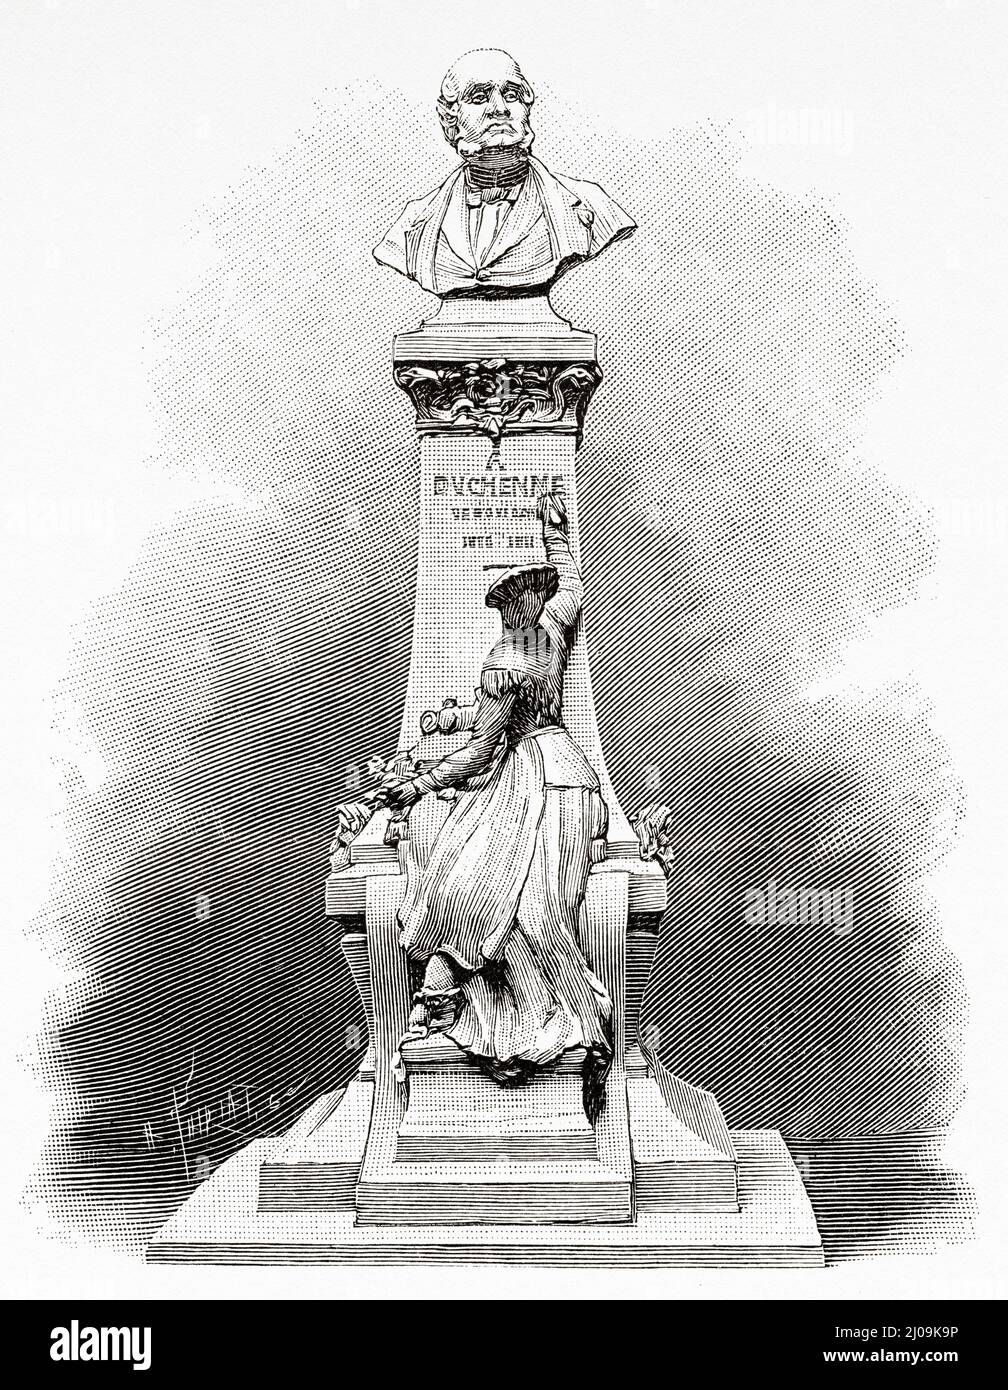 Monument to Doctor Guillaume Benjamin Amand Duchenne, known as Duchenne de Boulogne (1806-1875) was a 19th-century French physician and clinical researcher who is considered a pioneer in neurology and medical photography, Boulogne-sur-Mer. Pas de Calais Department. Old 19th century engraved illustration from La Nature 1899 Stock Photo